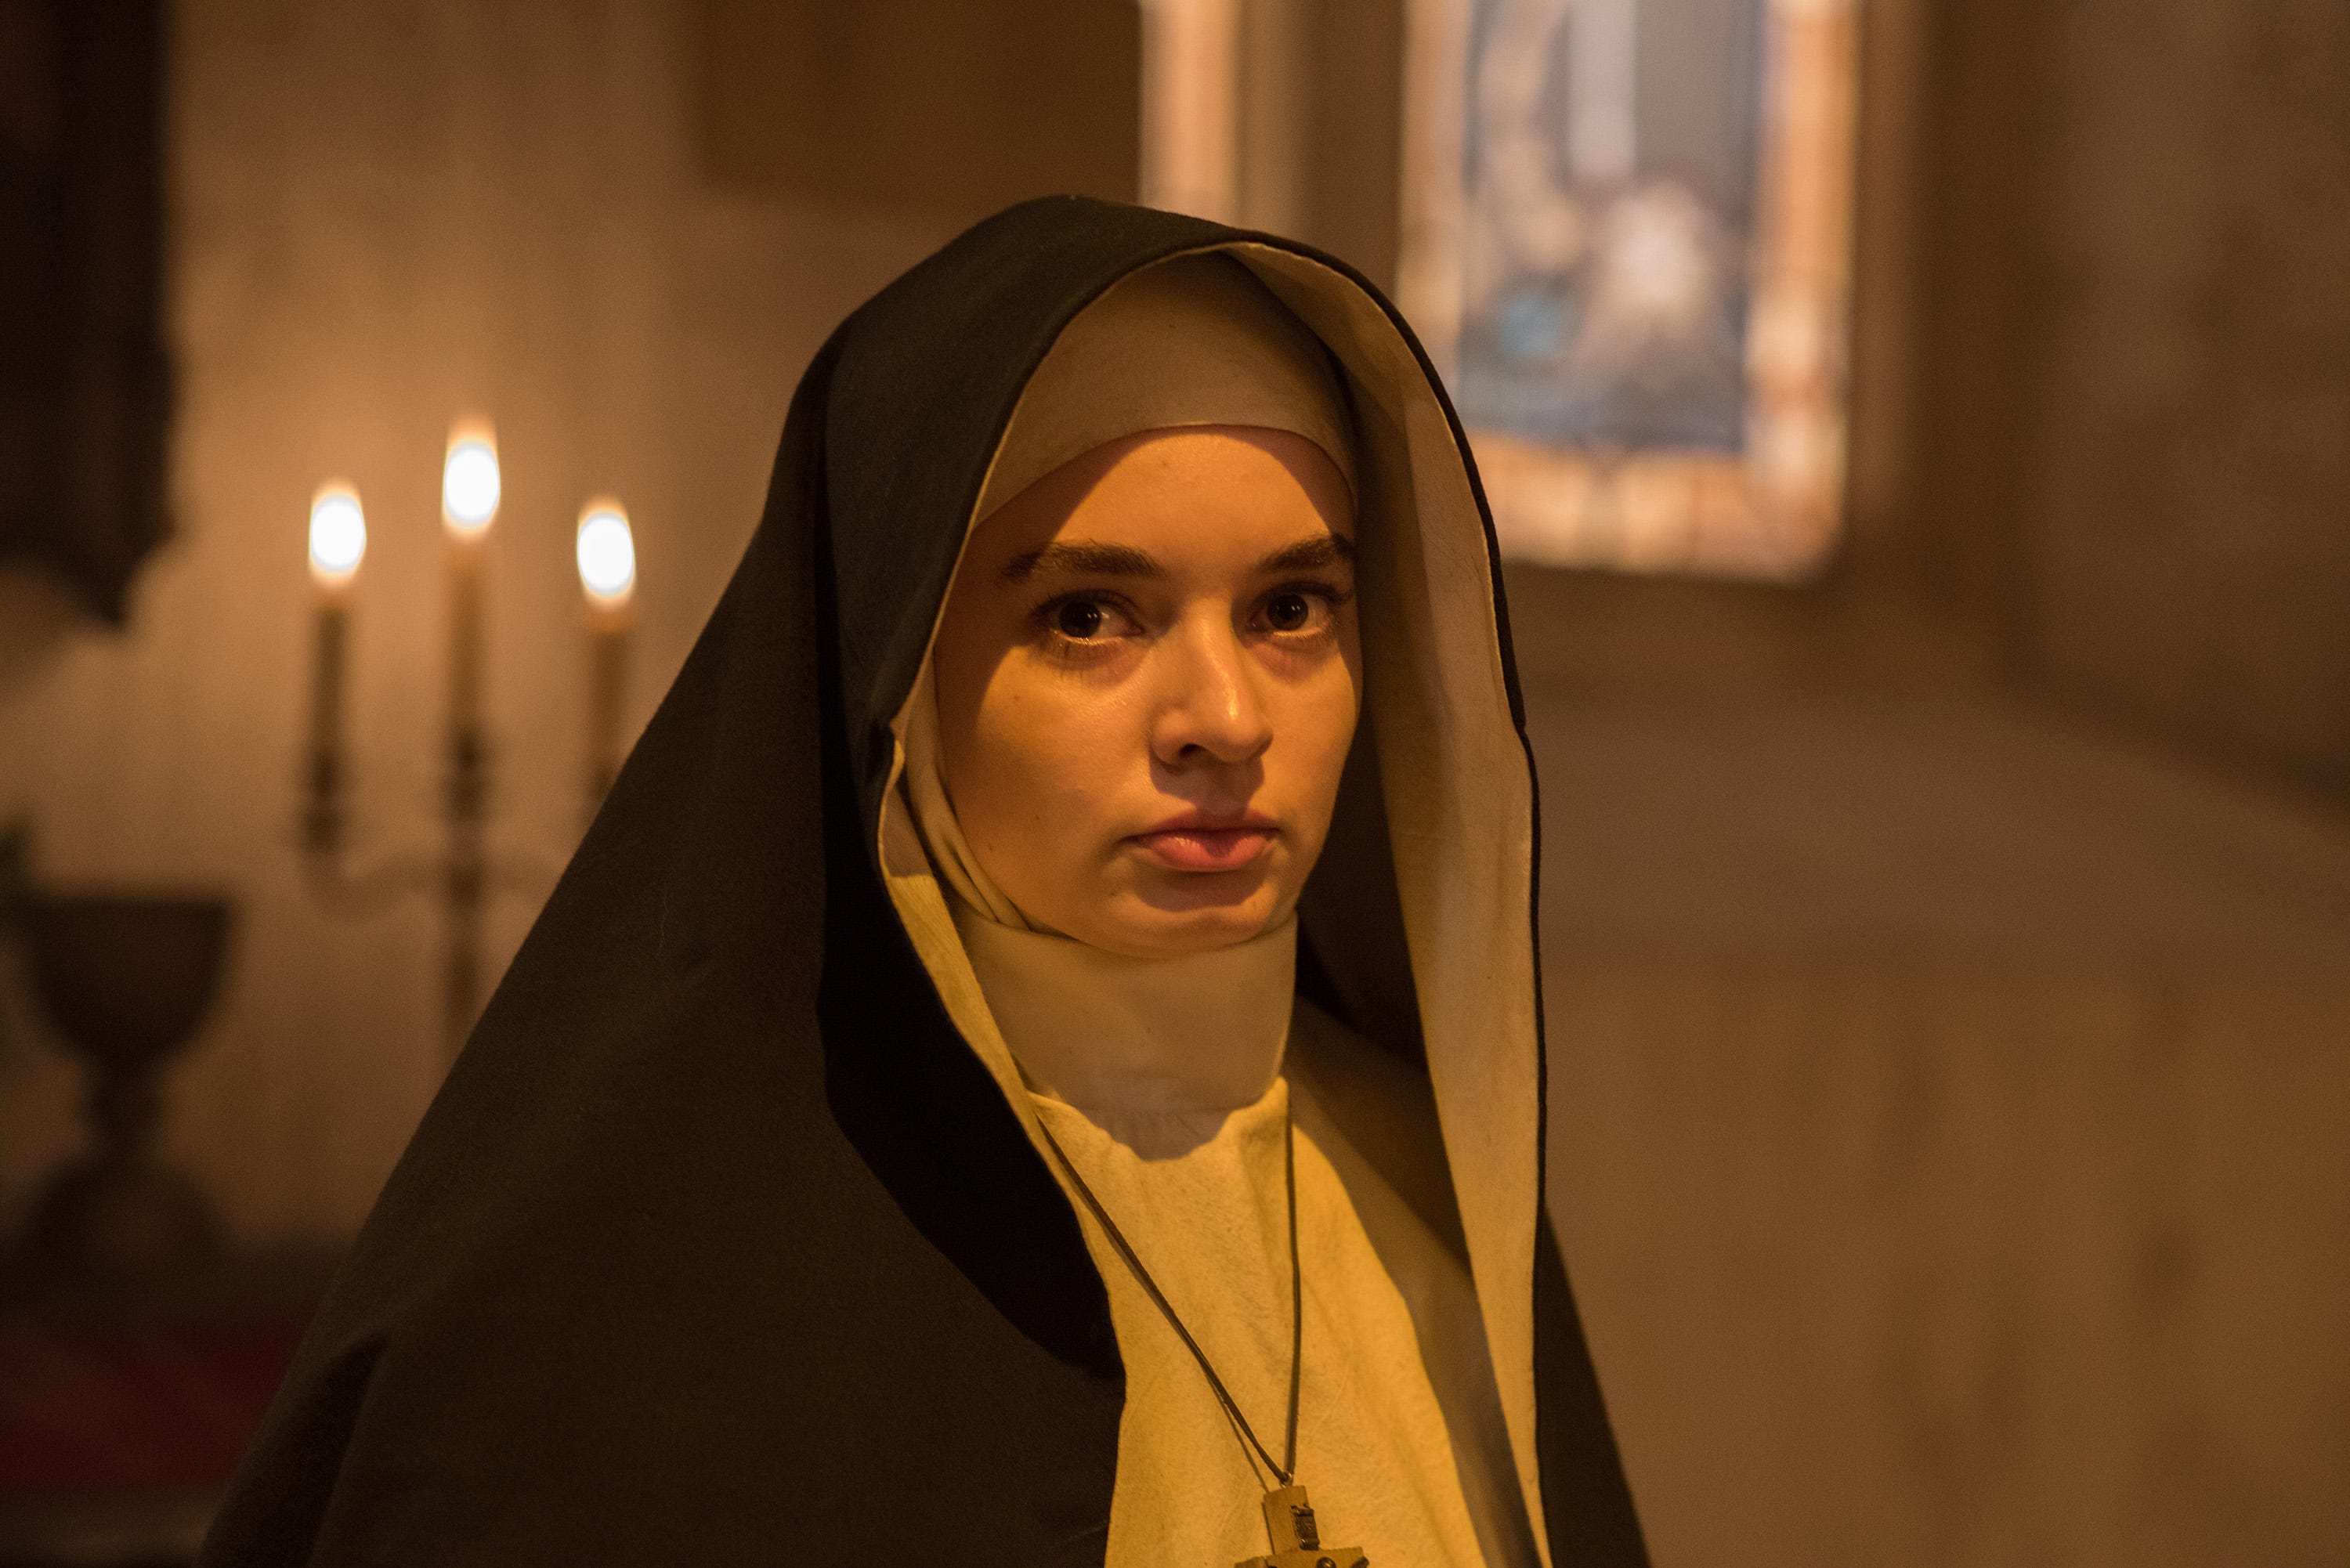 Ingrid Bisu as Sister Oana in the film "The Nun." The movie is playing at Regal West Manchester Stadium 13 and Frank Theatre Queensgate Stadium 13,